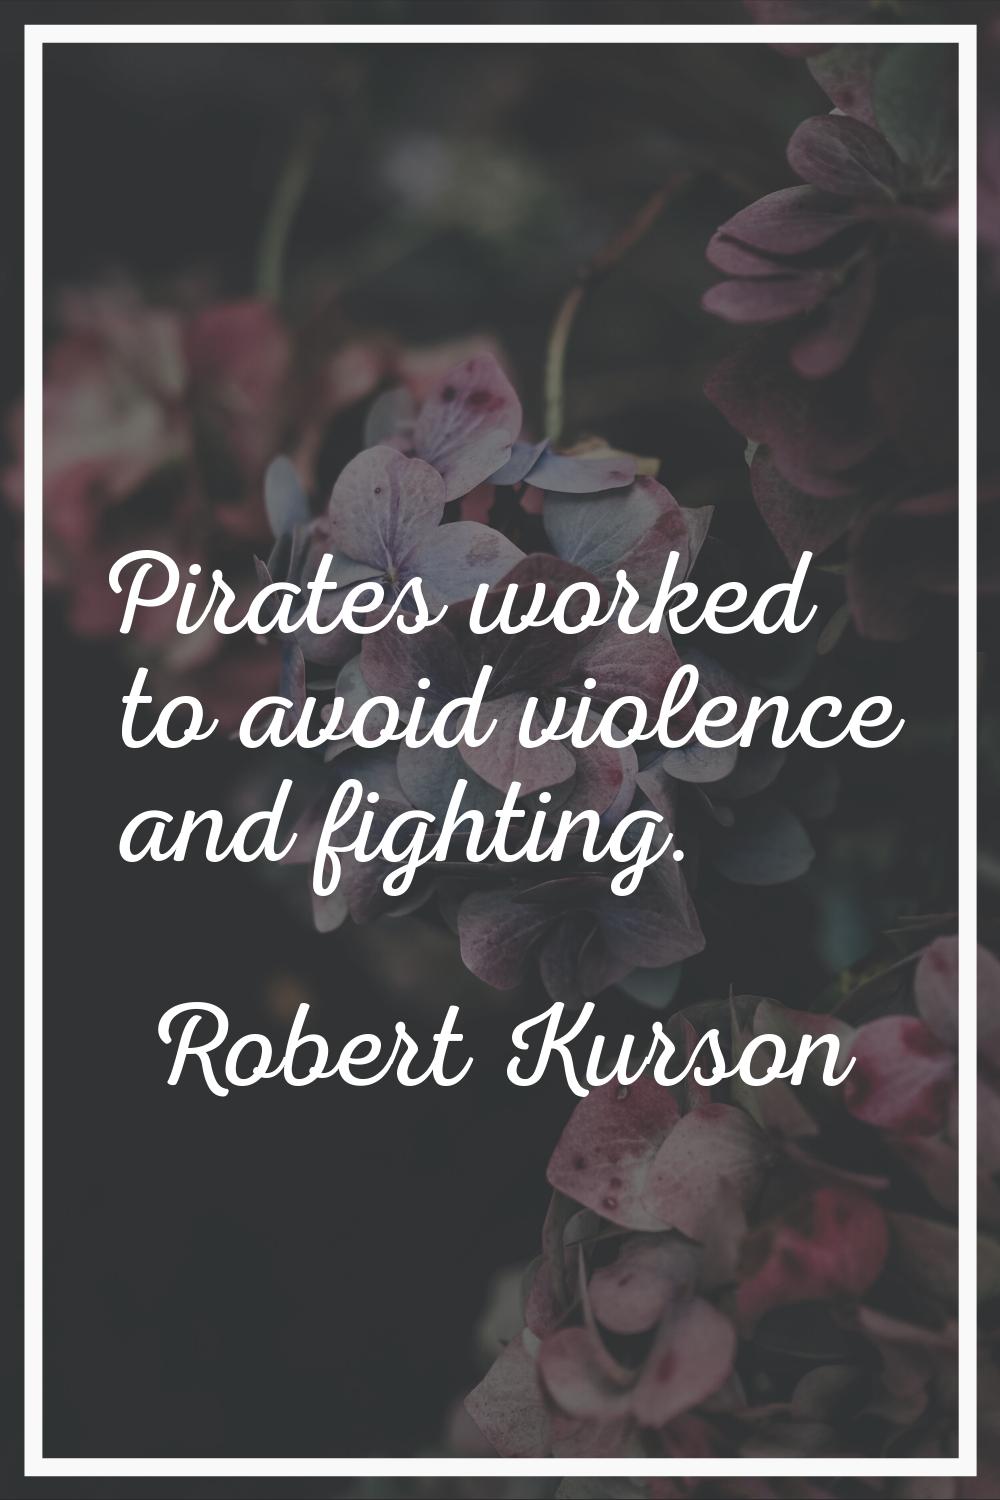 Pirates worked to avoid violence and fighting.